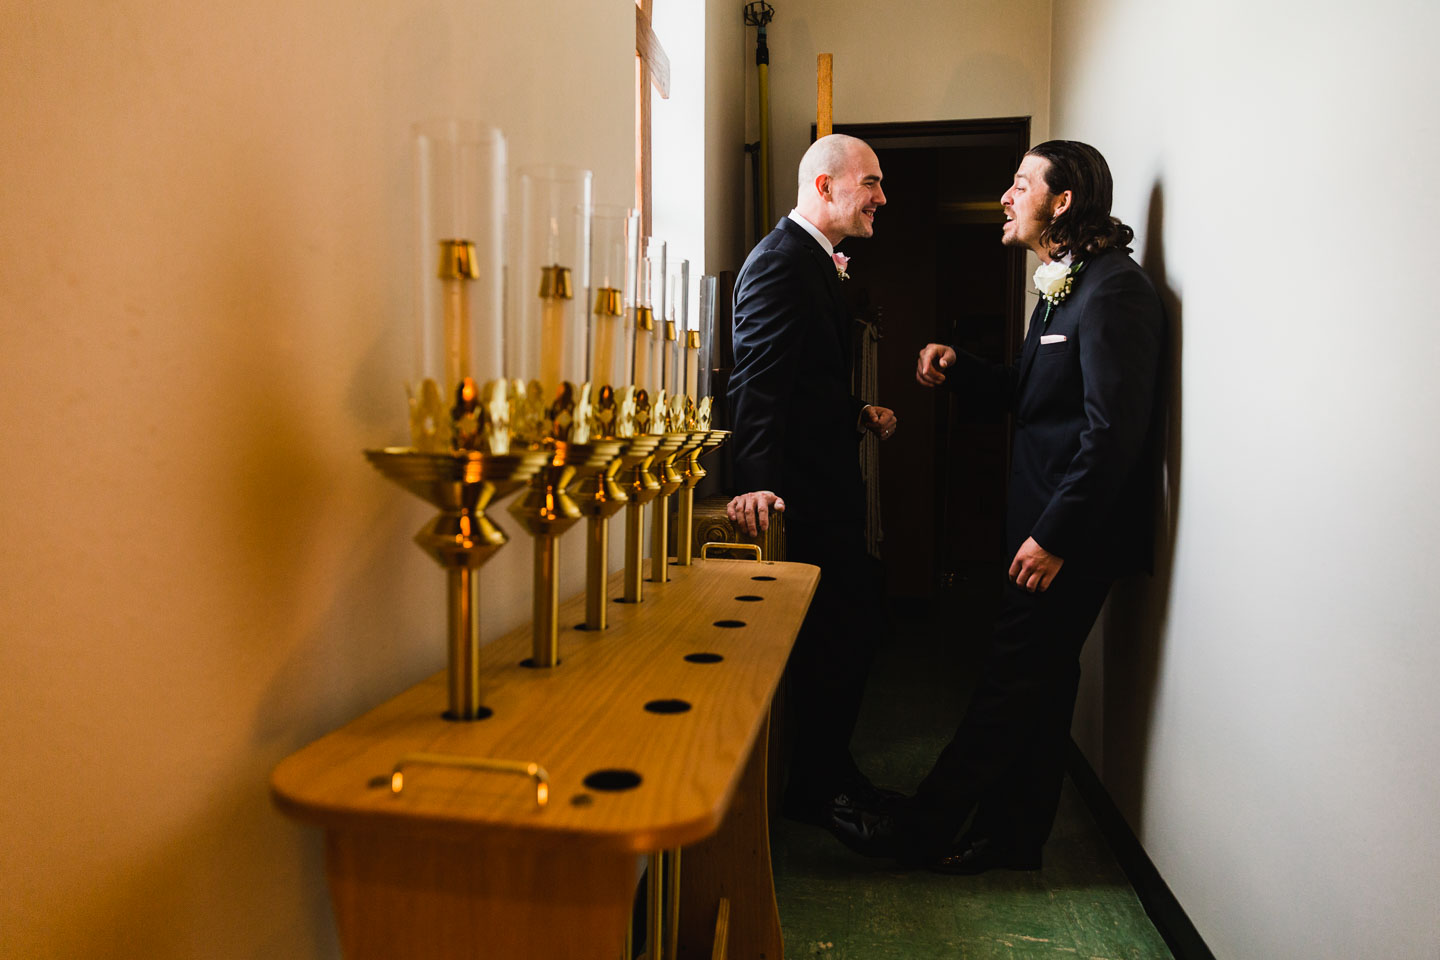 candid moment between a groom and his groomsman, in the back of the church, before the ceremony, surrounded by candles in a narrow hallway